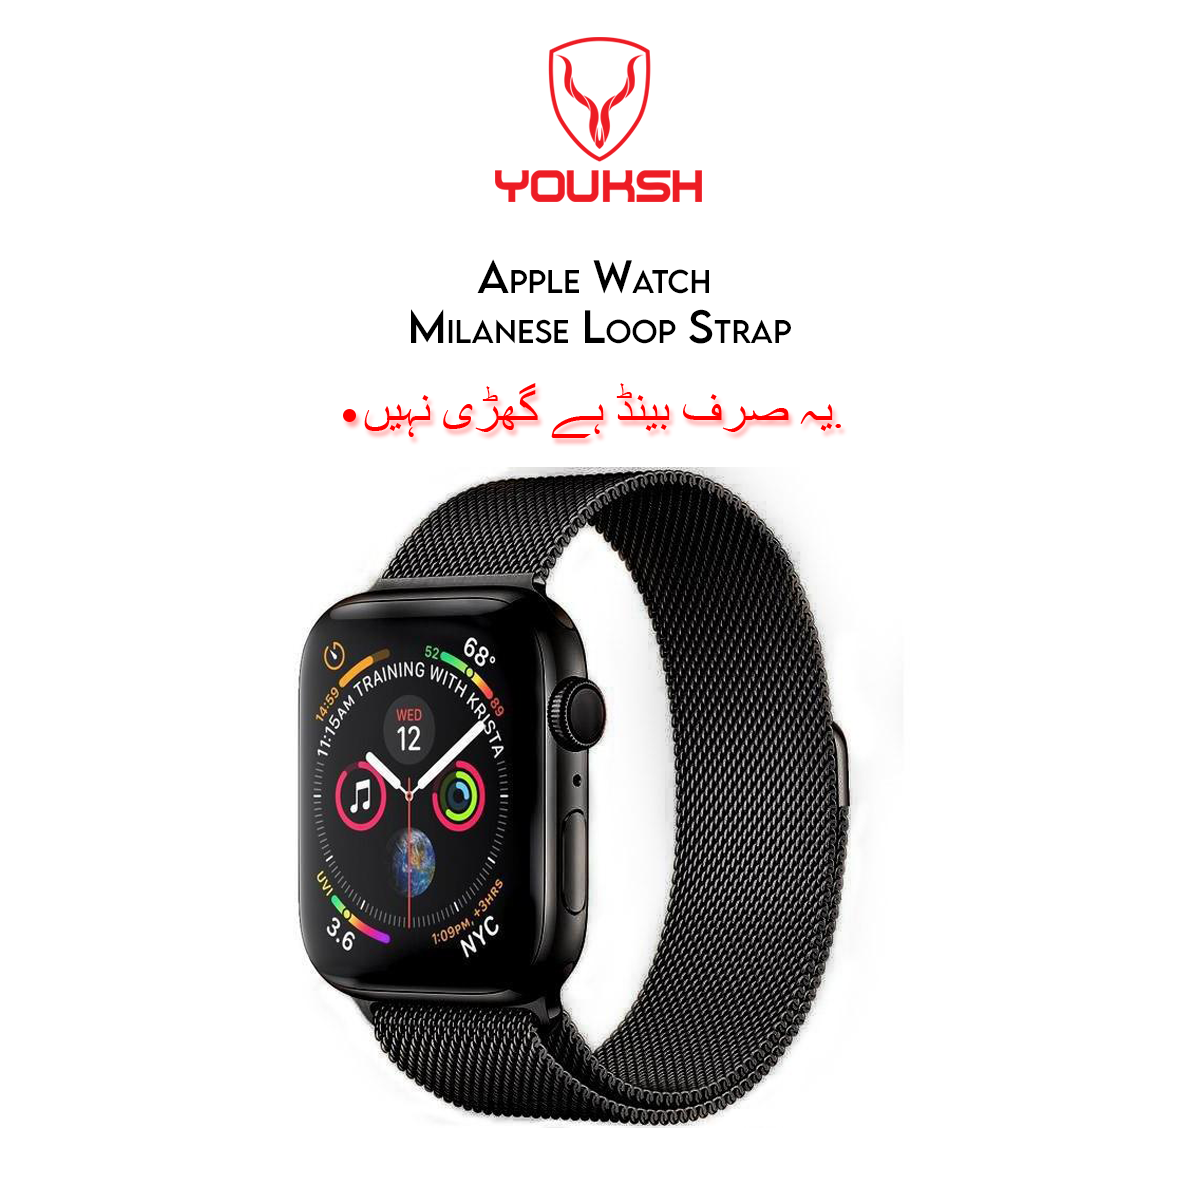 YOUKSH Apple Watch - Milanese Stainless Steel - Strap - 42mm/44mm, For Apple Watch Series 1/2/3/4/5/6.